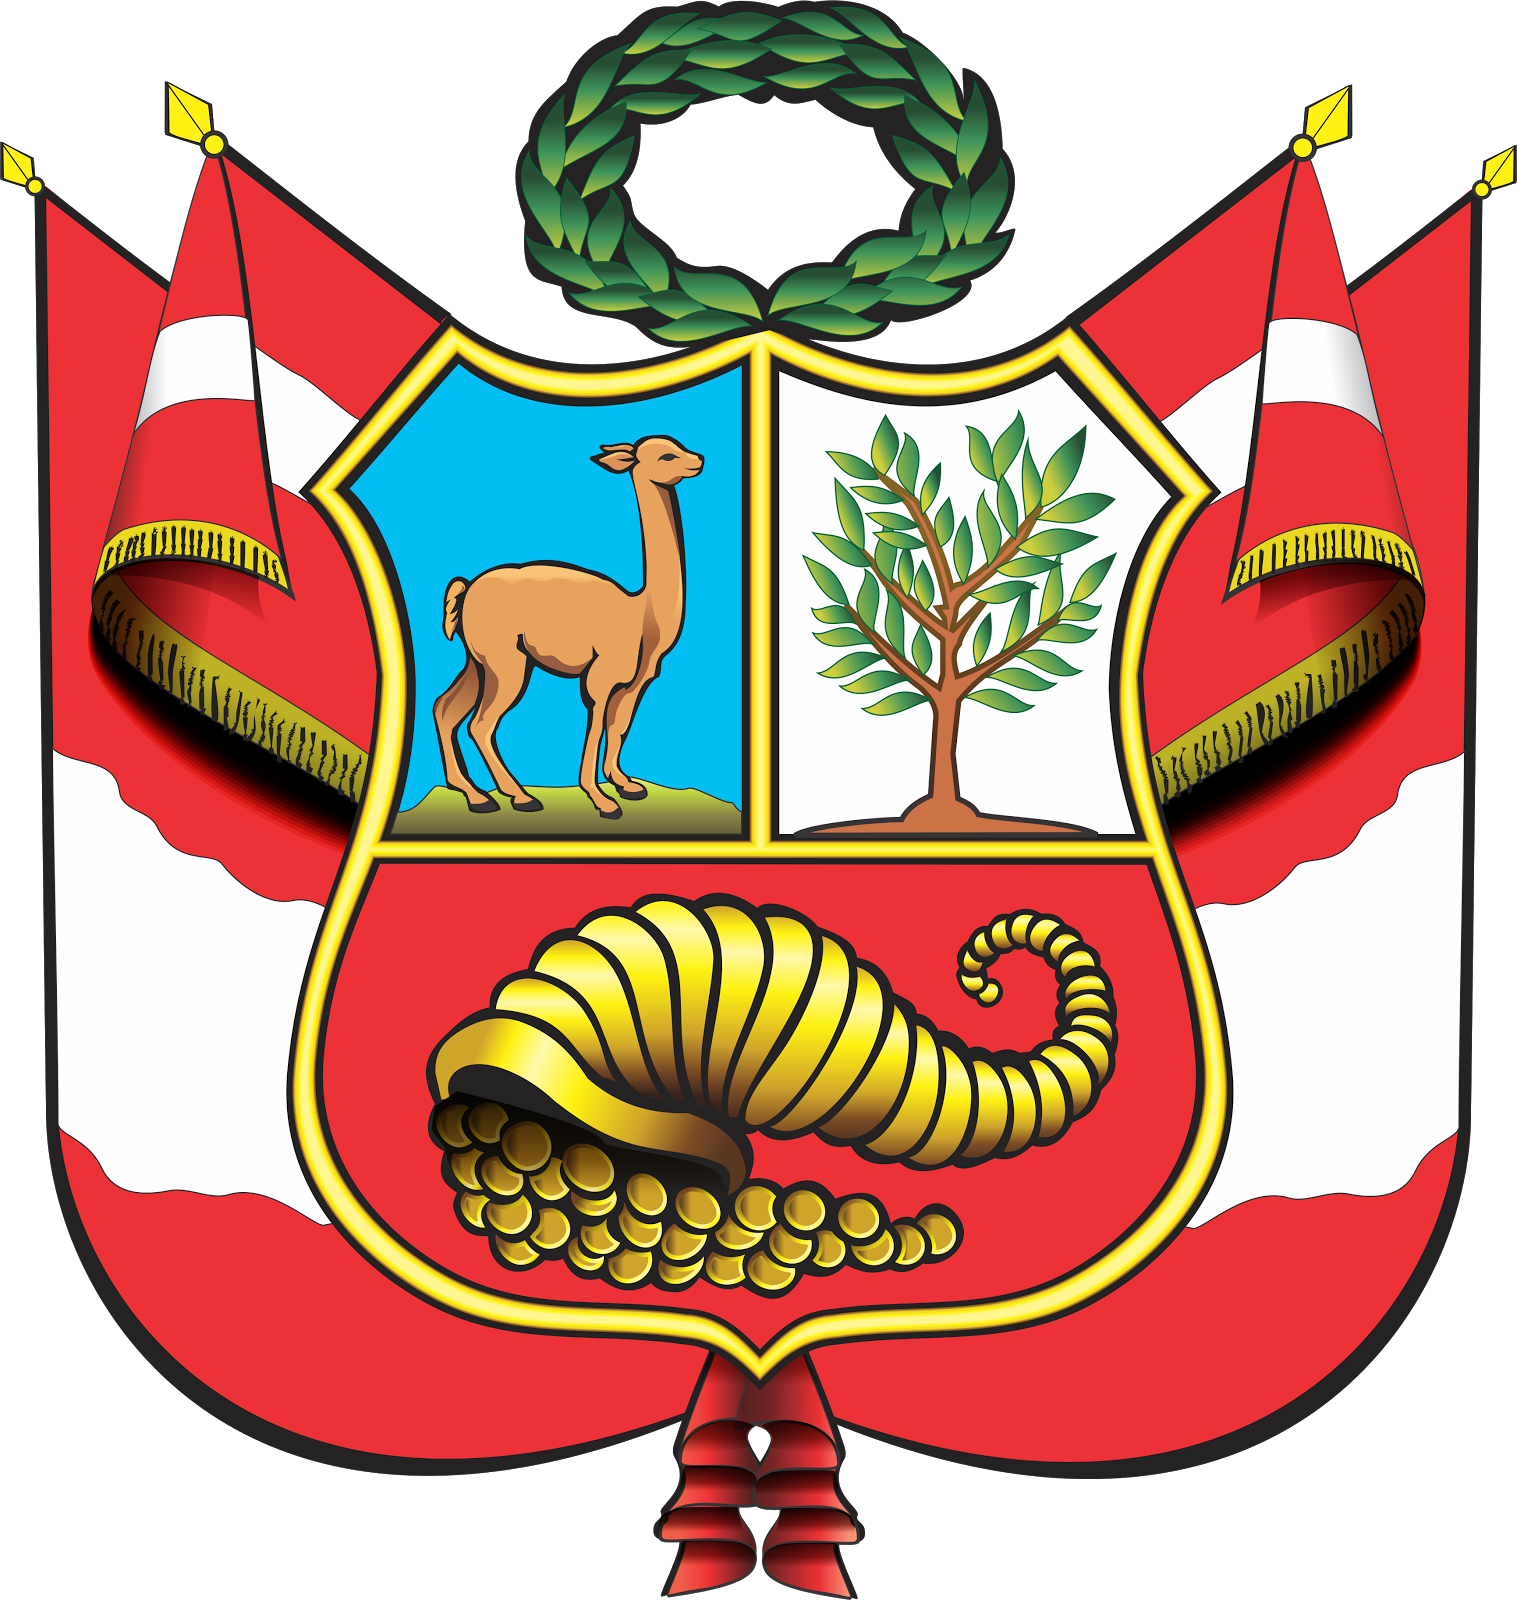 0 Result Images of Sello Escudo Nacional Png - PNG Image Collection